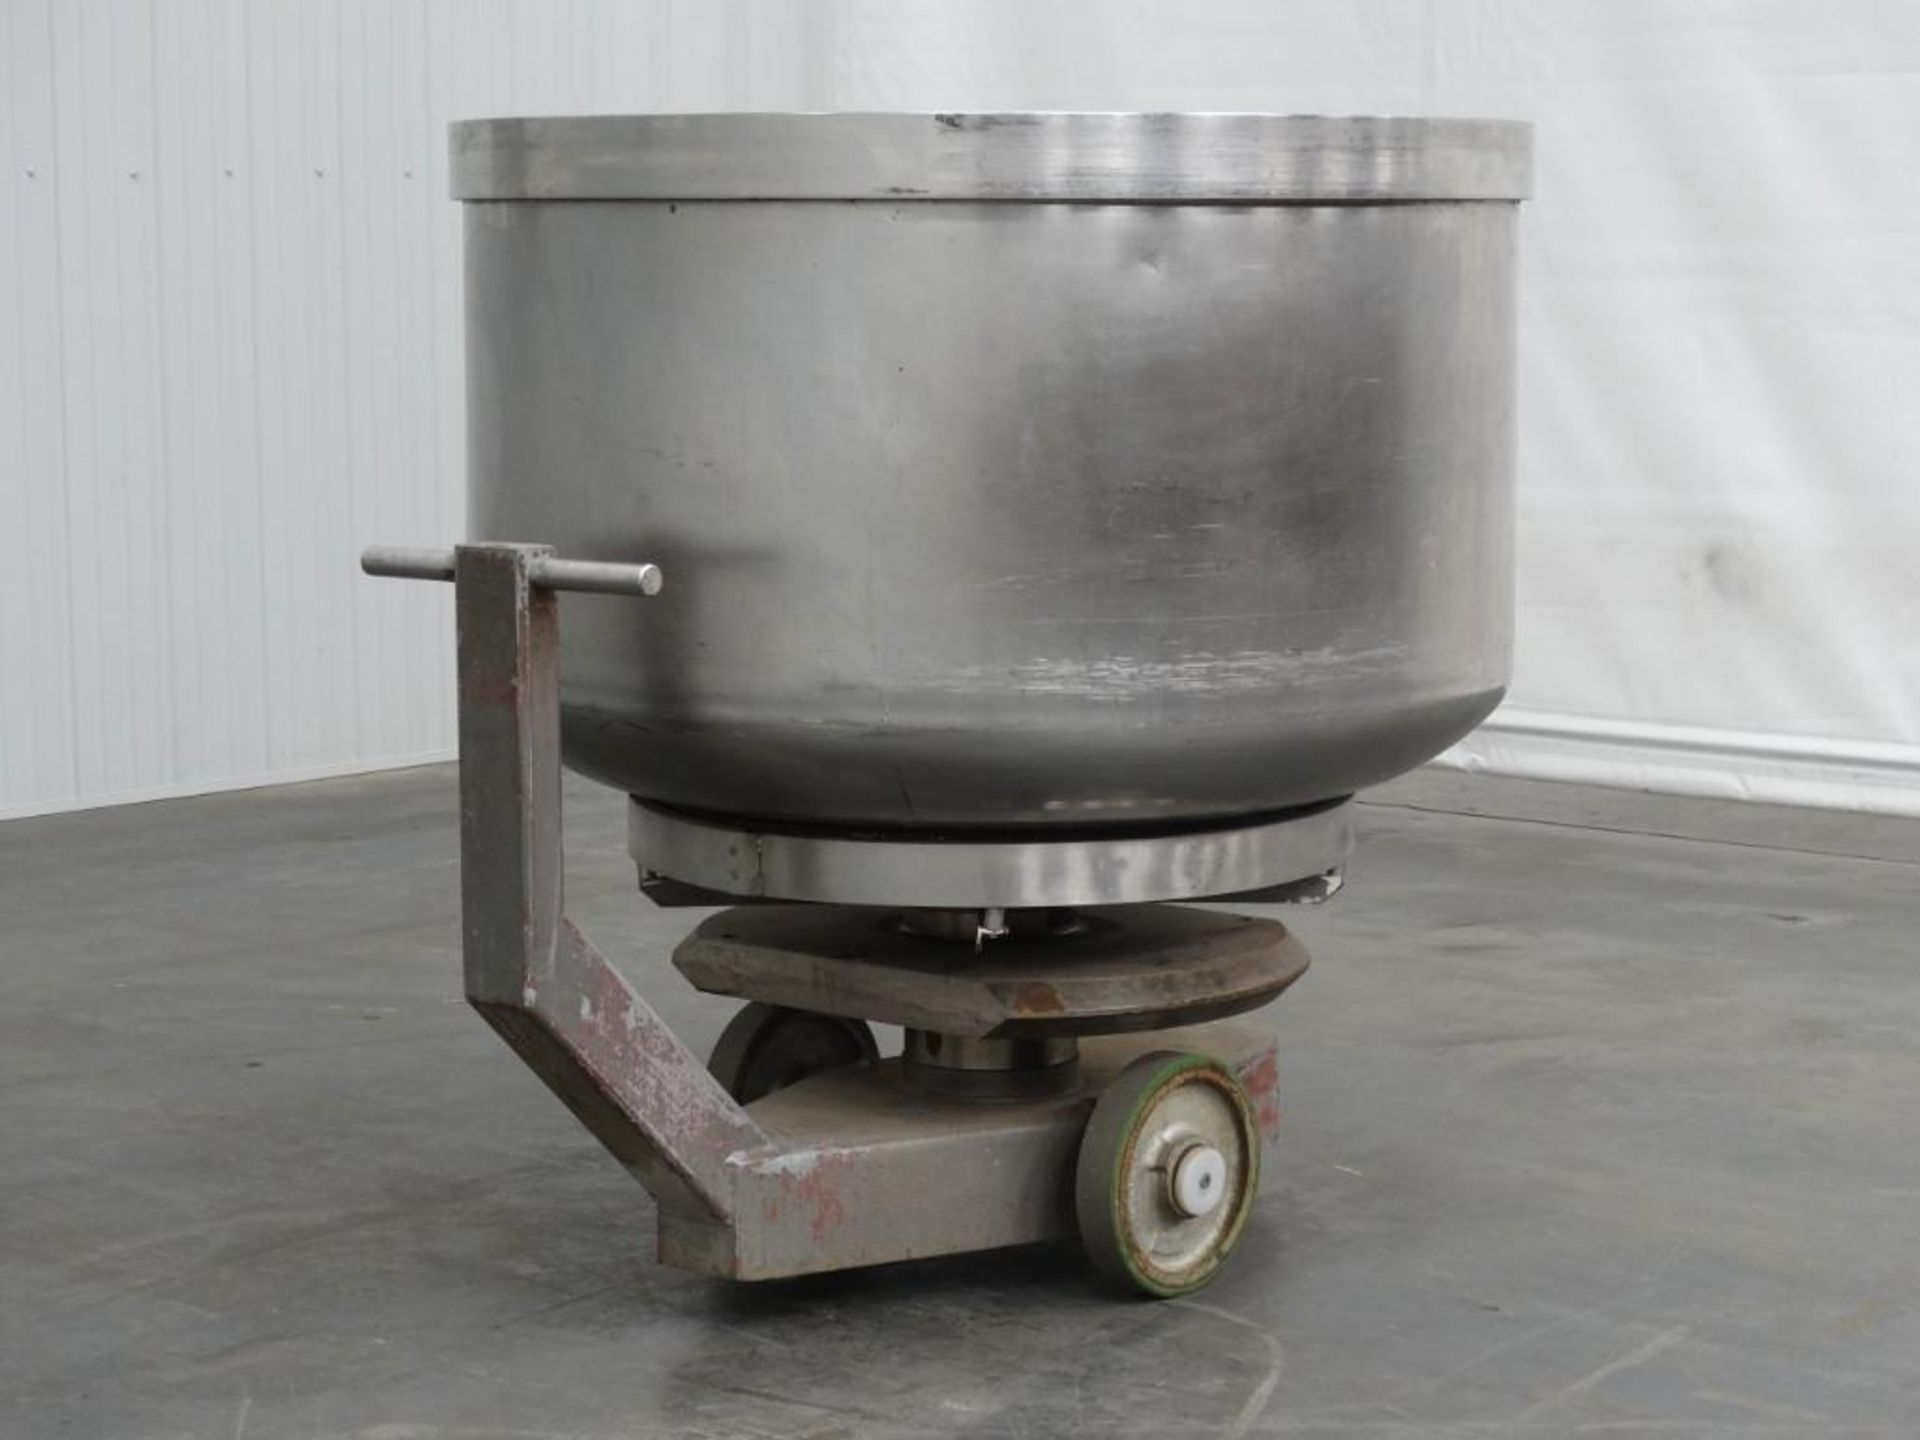 VMI 175 Gallon Rotating Stainless Steel Mixing Bowl and Dolly